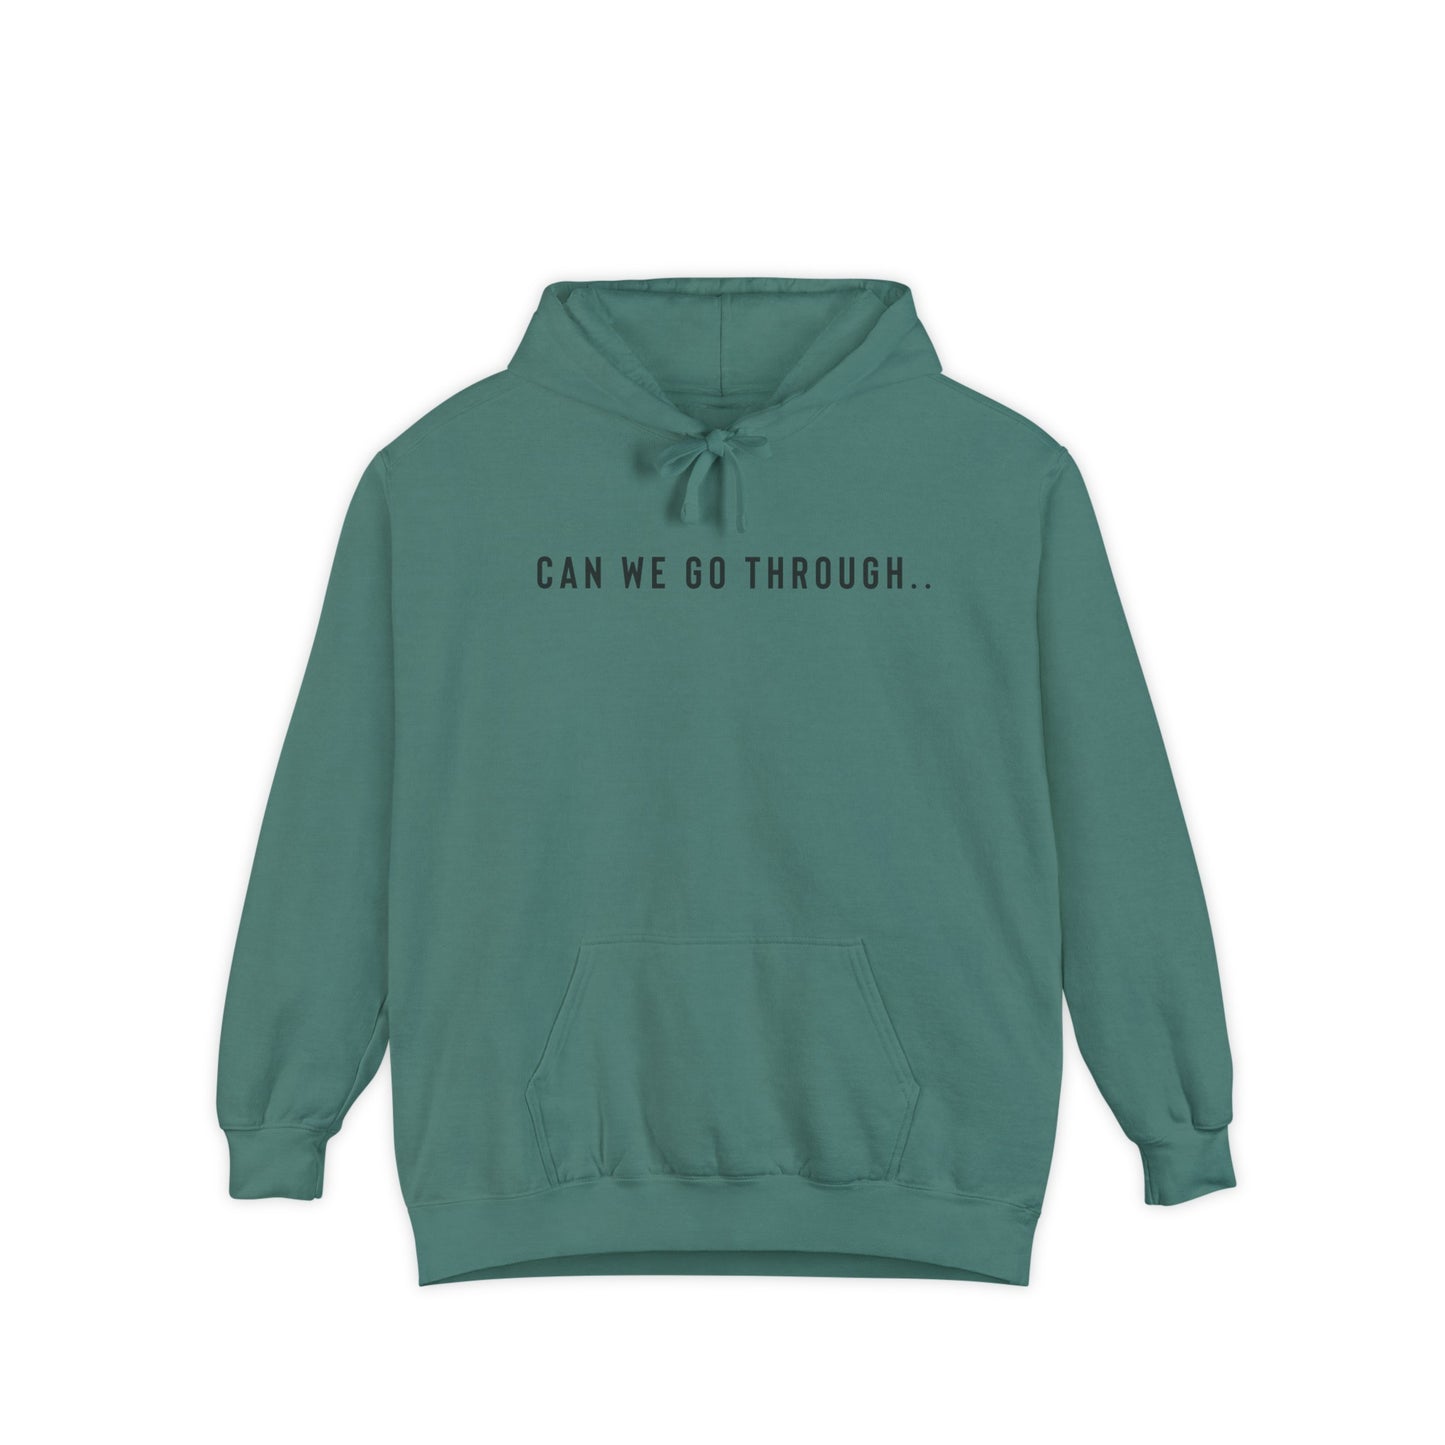 Can we go through.. Hoodie